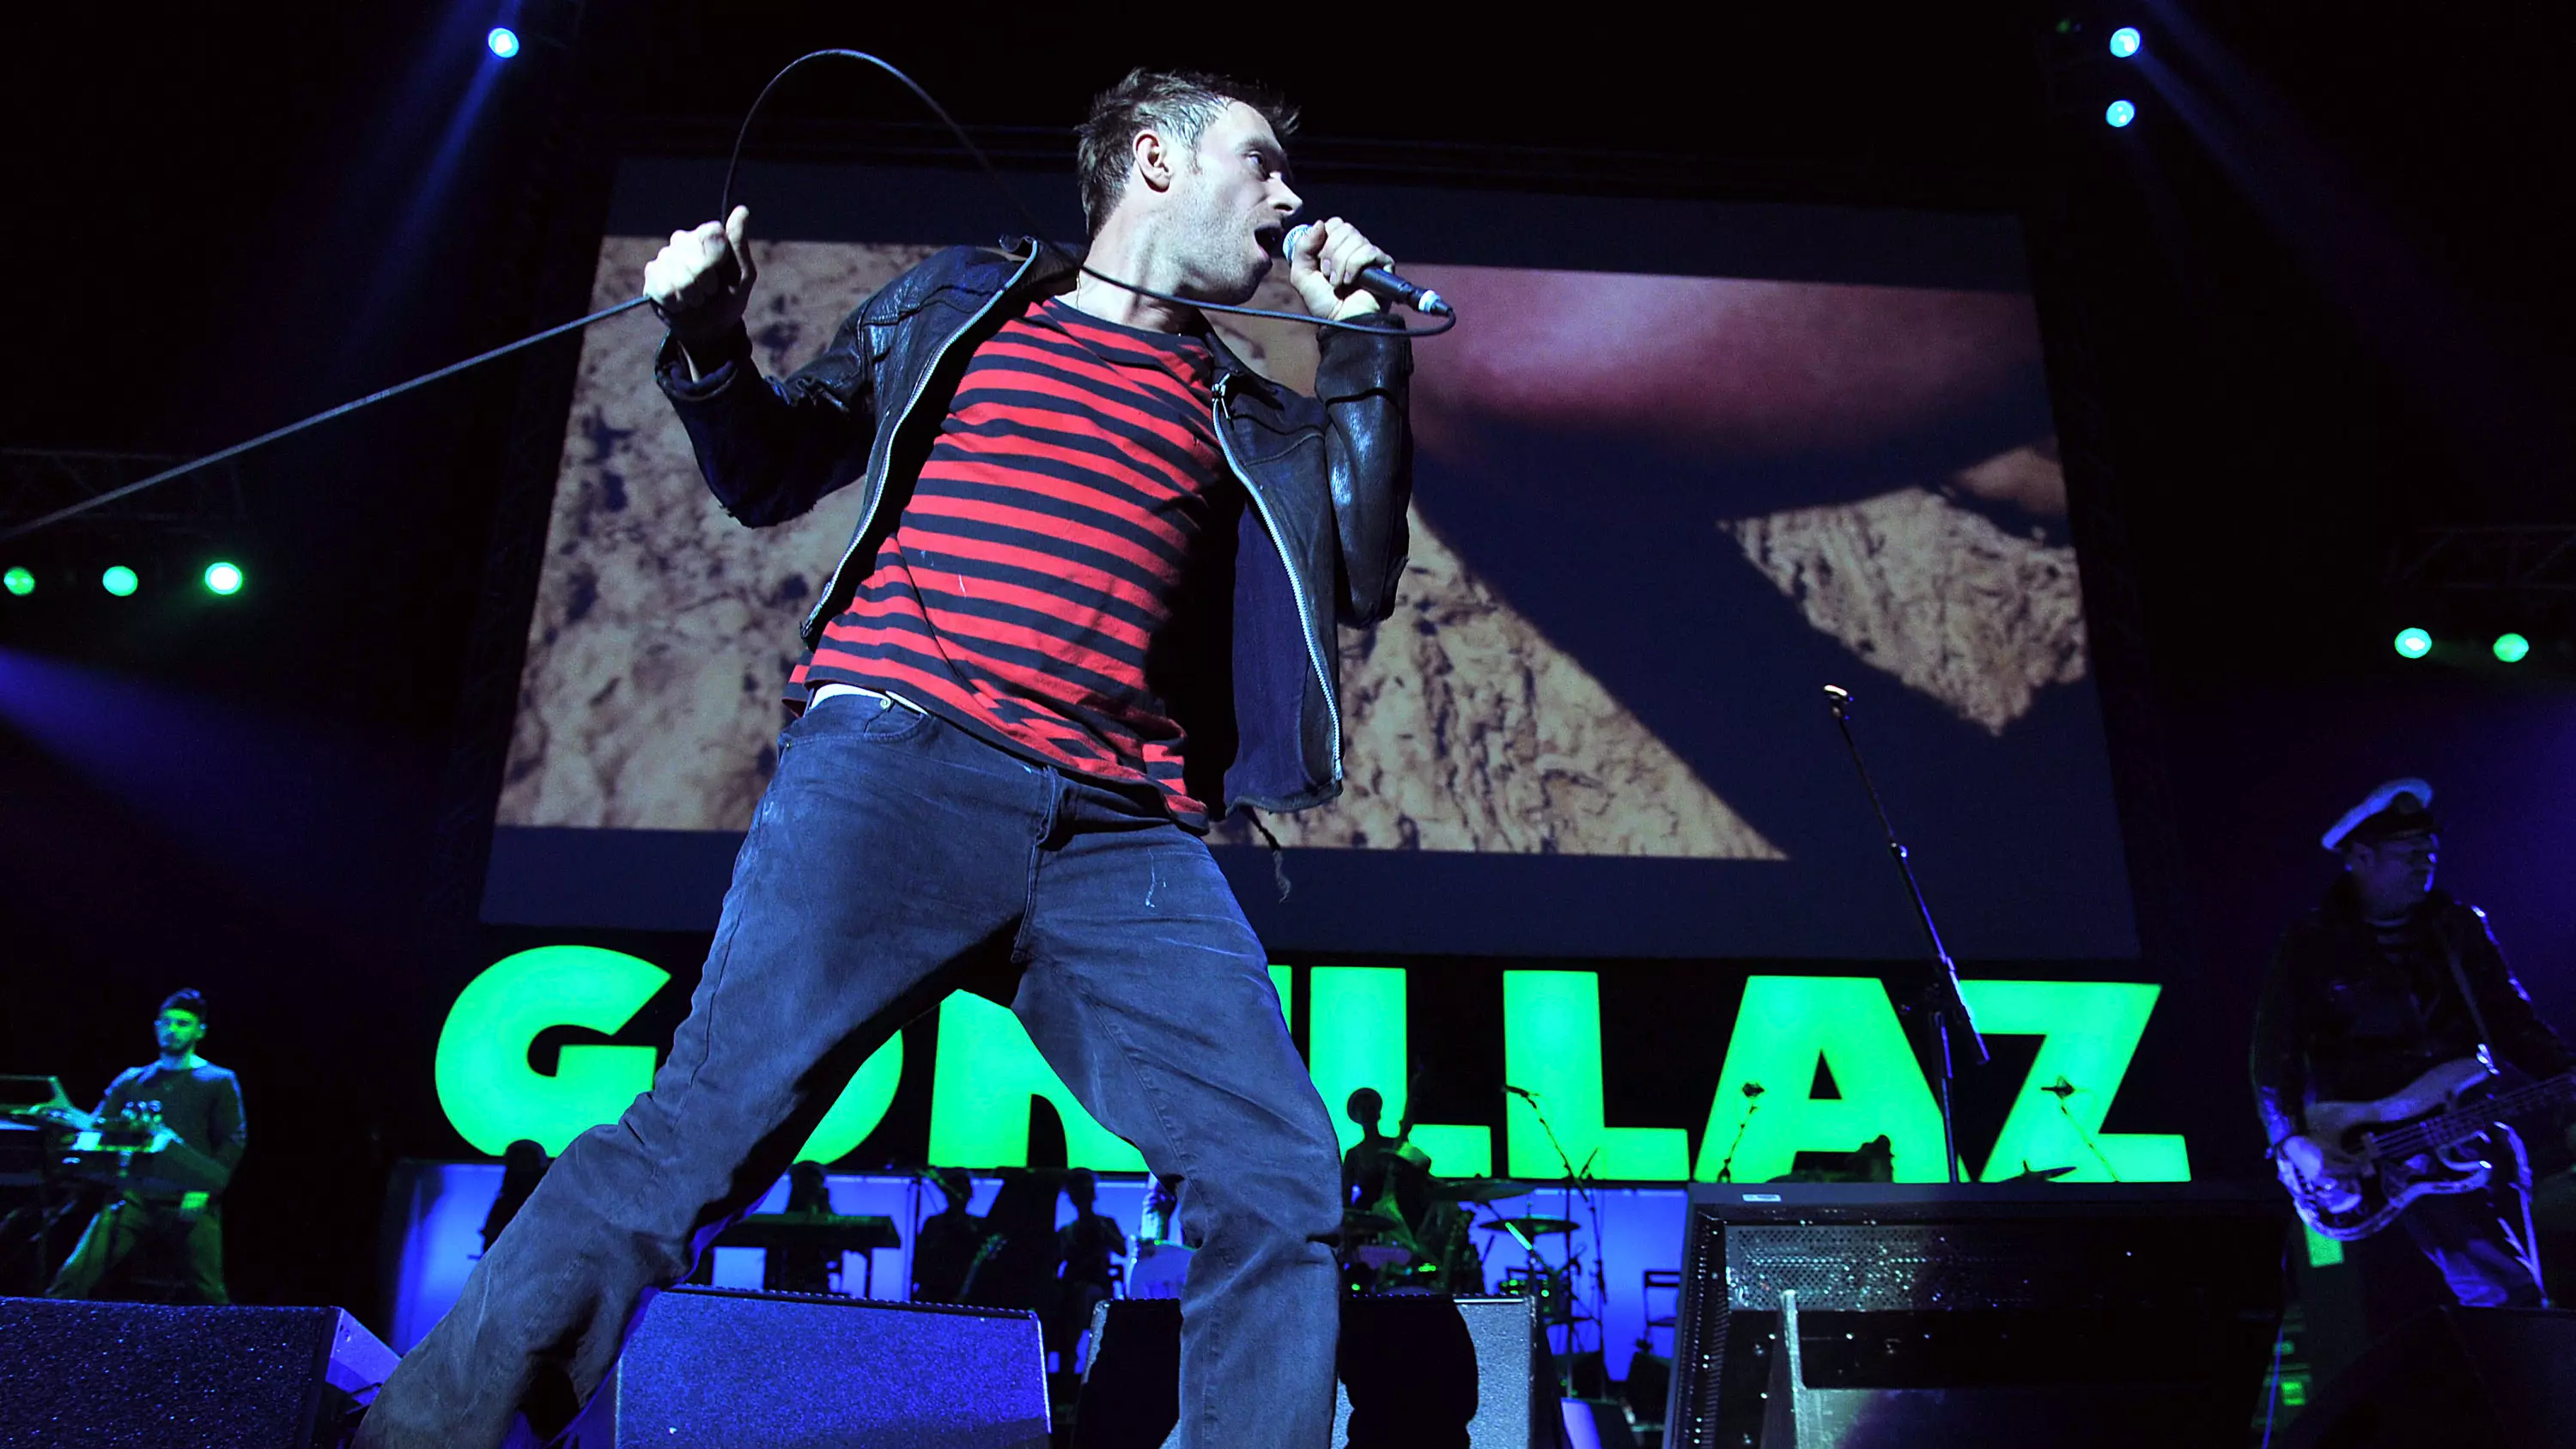 Gorillaz Are Back But How Much Do You Know About The Cartoon Band?